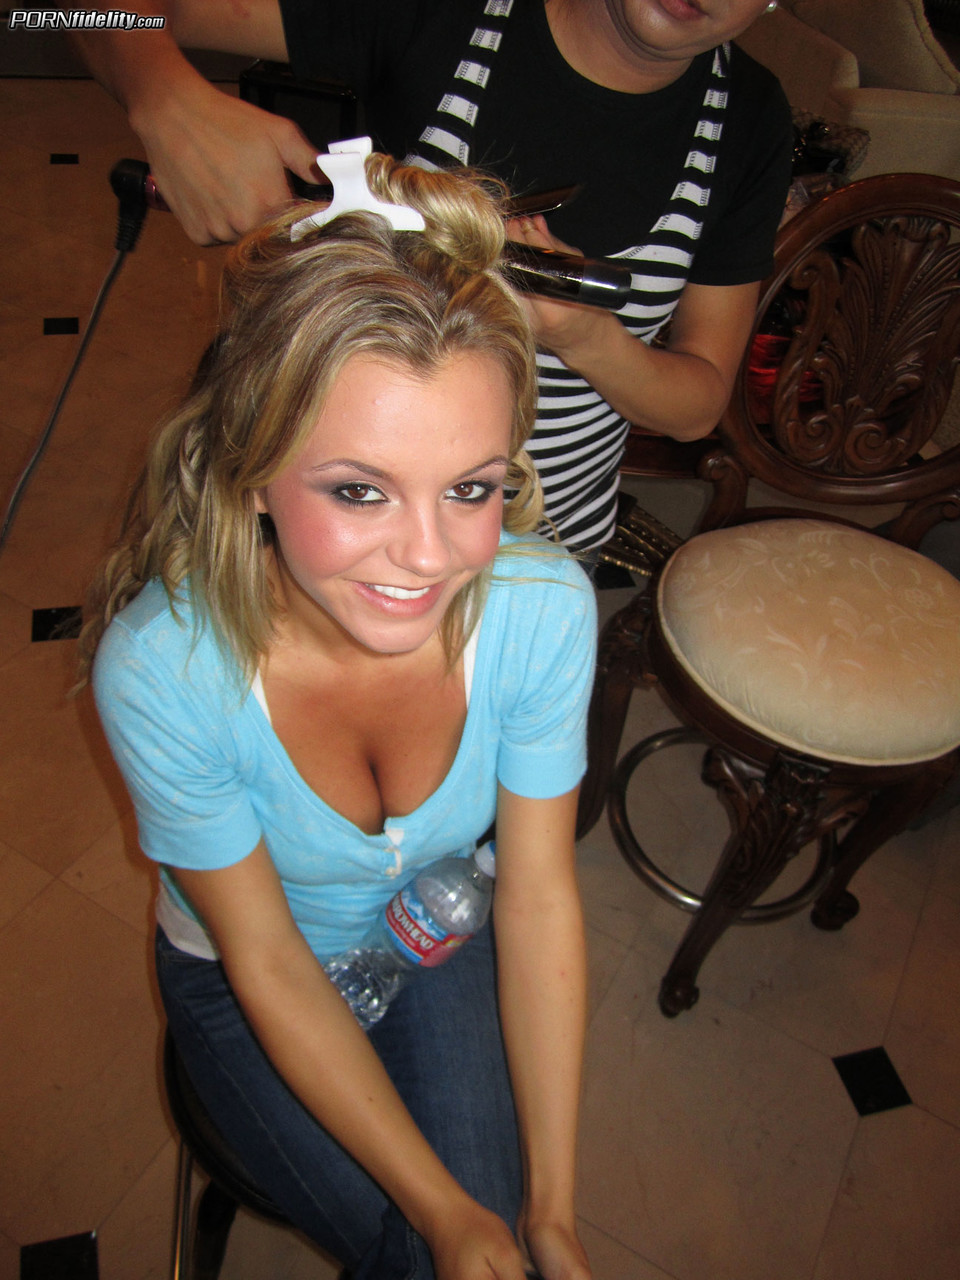 Attractive women Bree Olson & Kelly Madison strip together and pose for camera porn photo #425364725